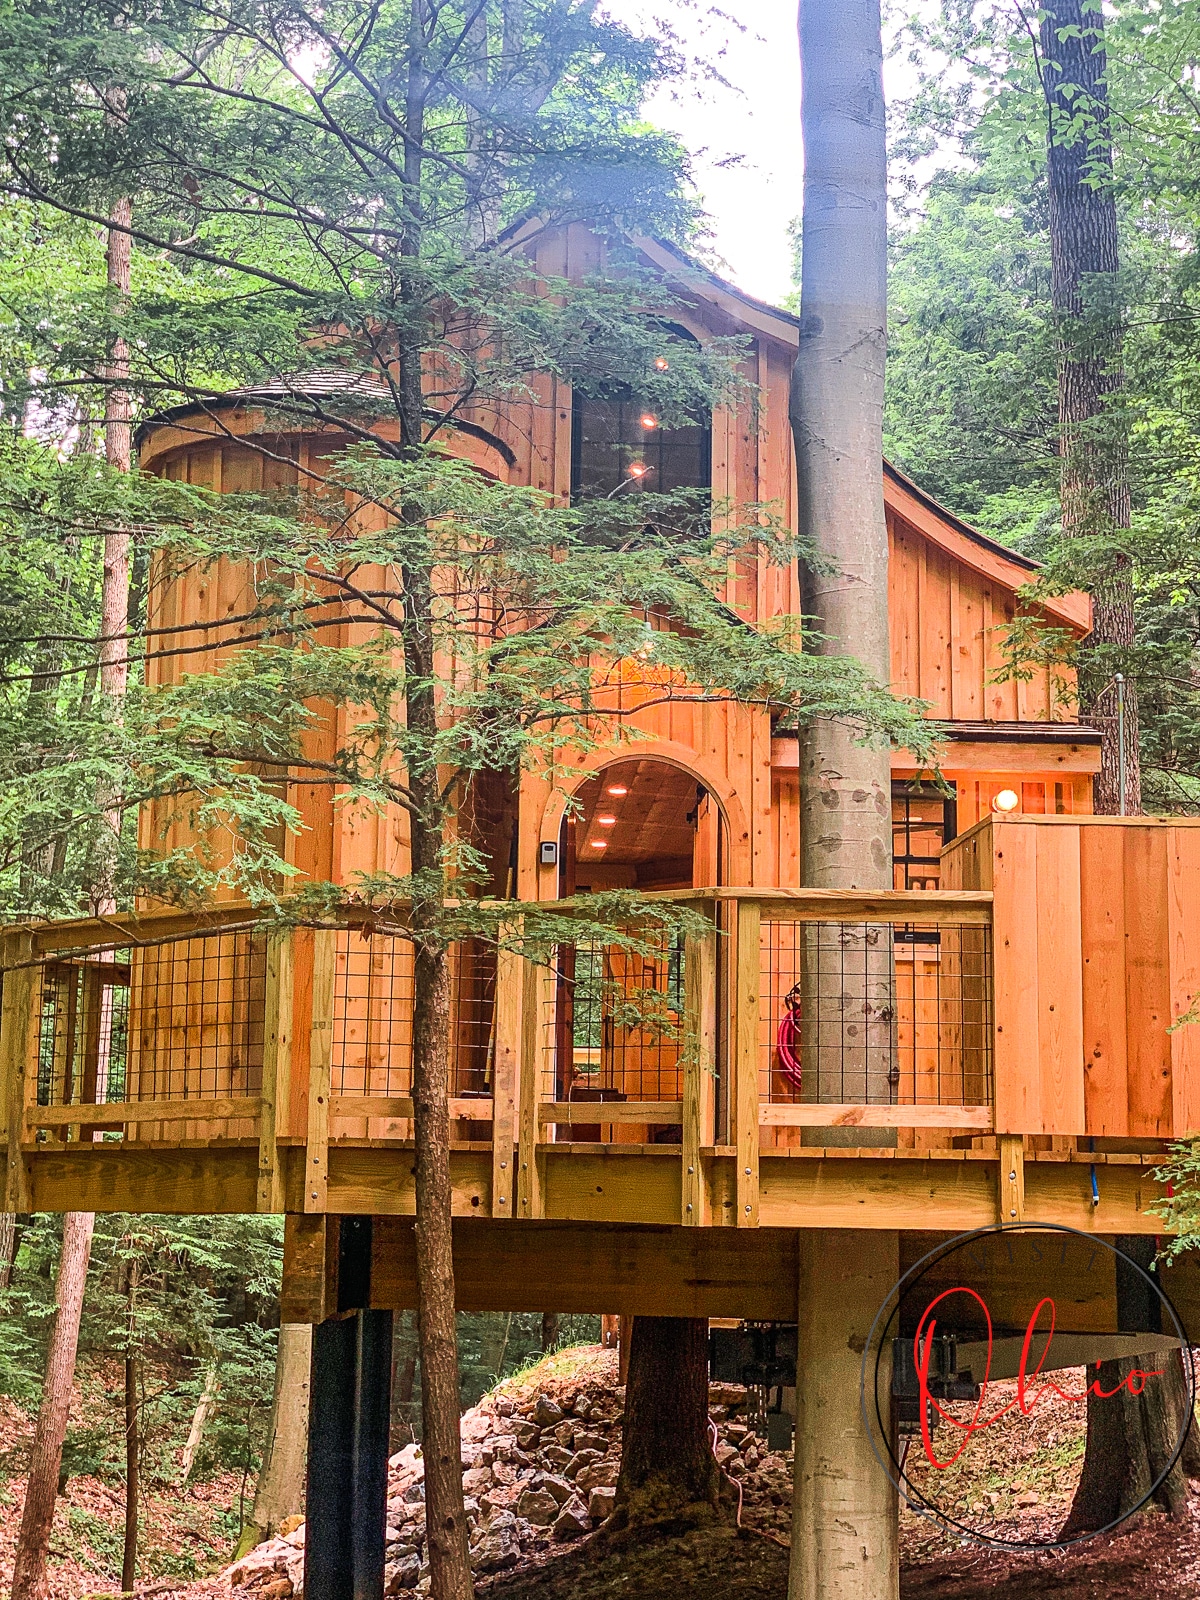 Wooden large treehouse among tall healthy trees with green leaves 